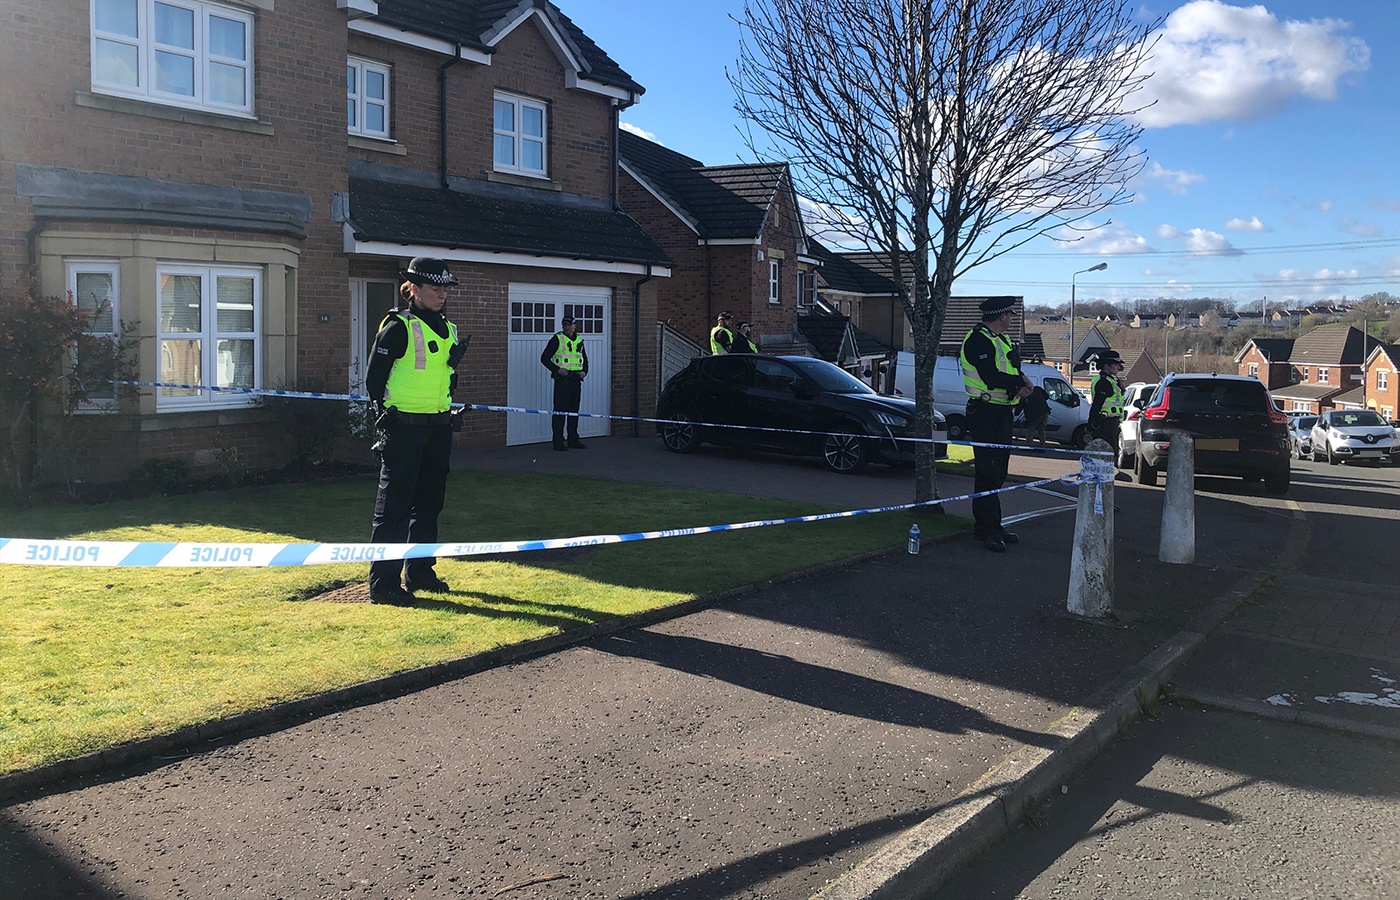 Nicola Sturgeon said she did not know about the search on her home until it was under way.